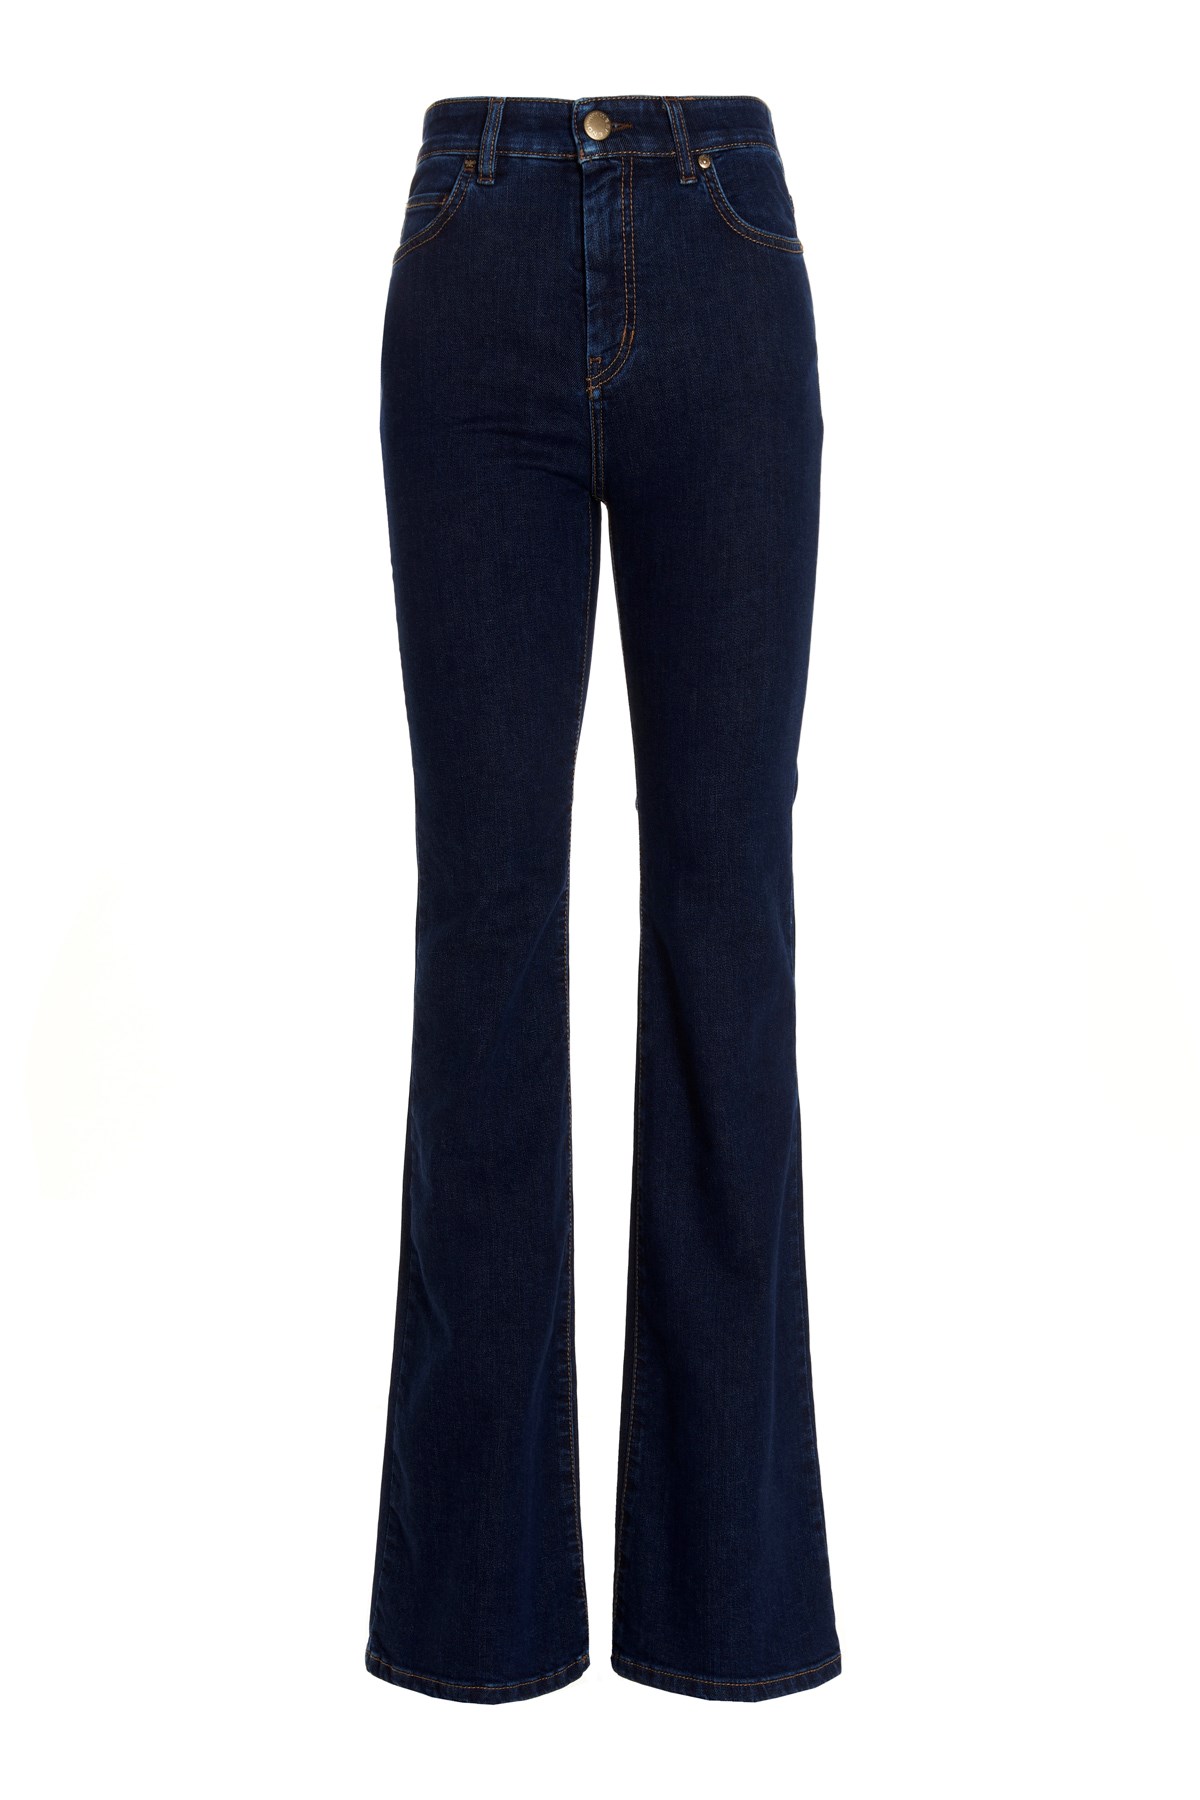 WEEKEND MAX MARA Jeans 'Can Can'